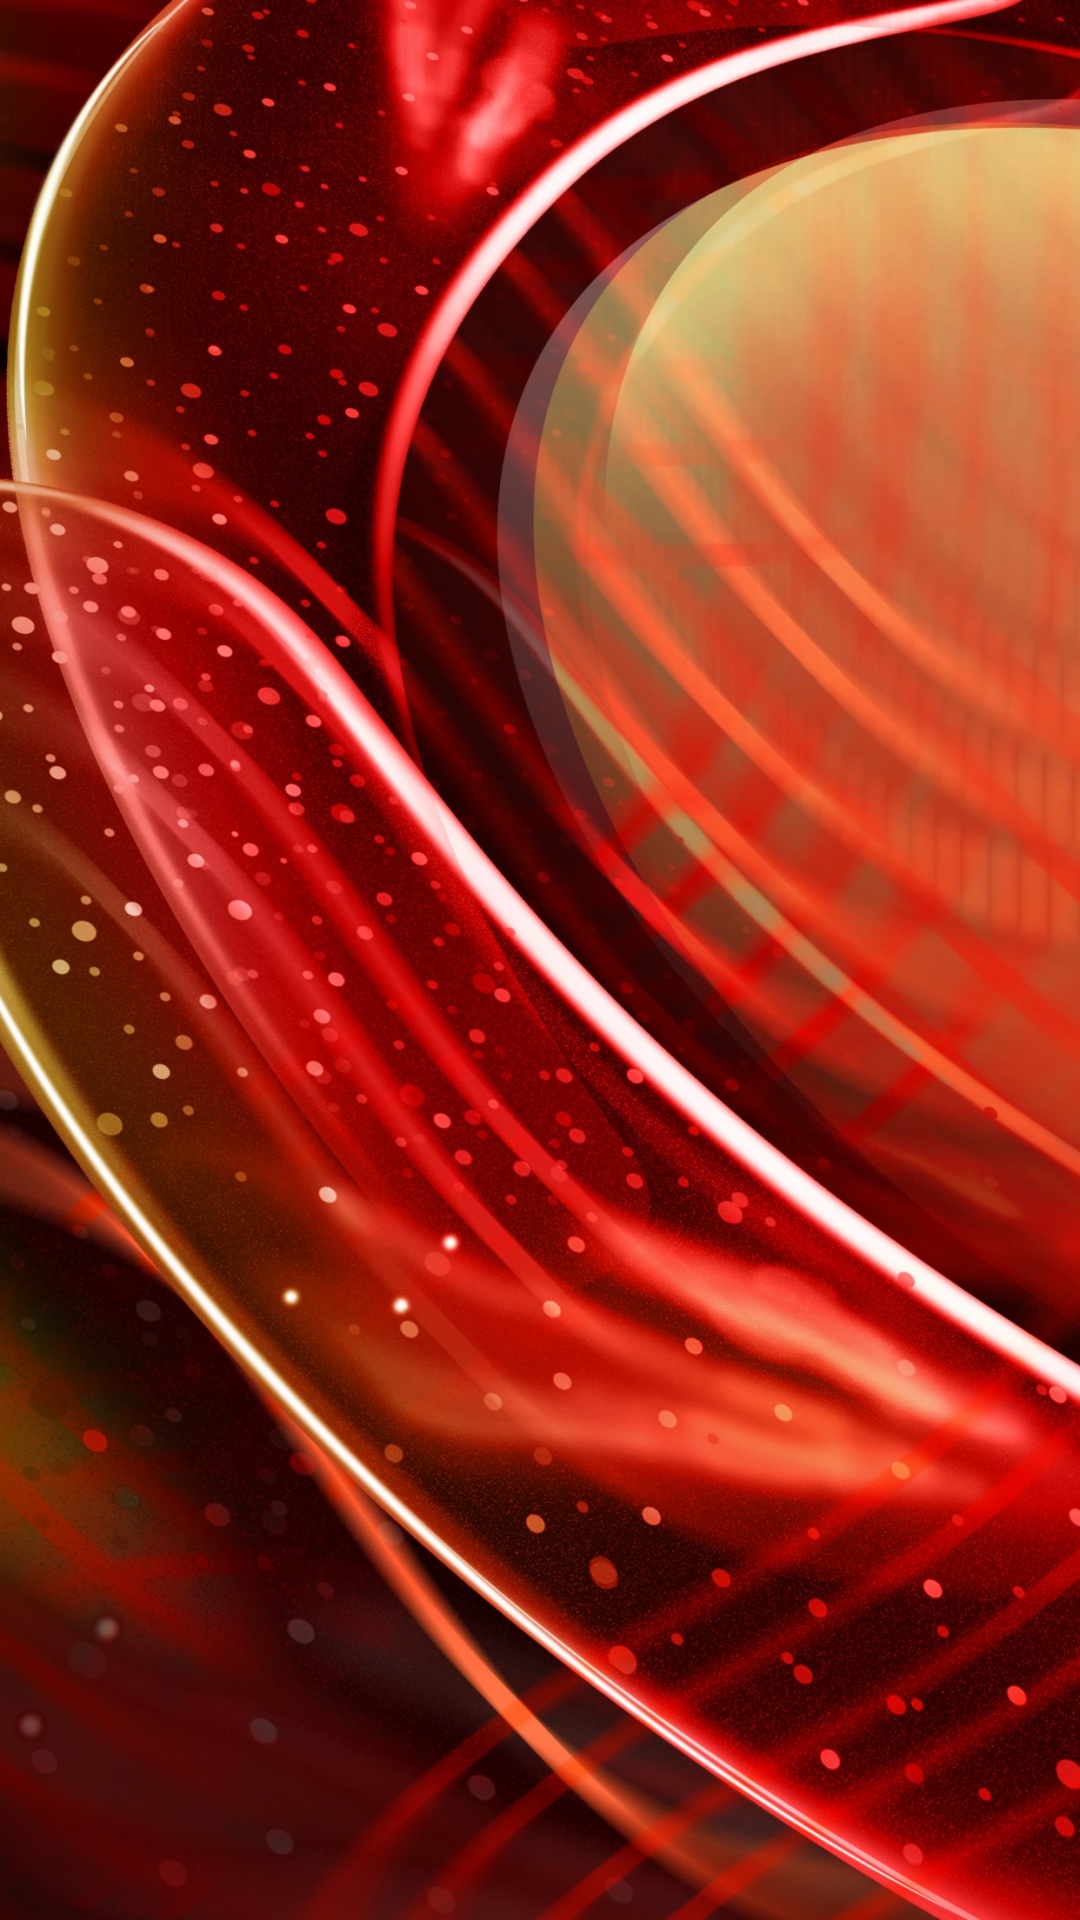 Red and White Light Digital Wallpaper. Wallpaper in 1080x1920 Resolution